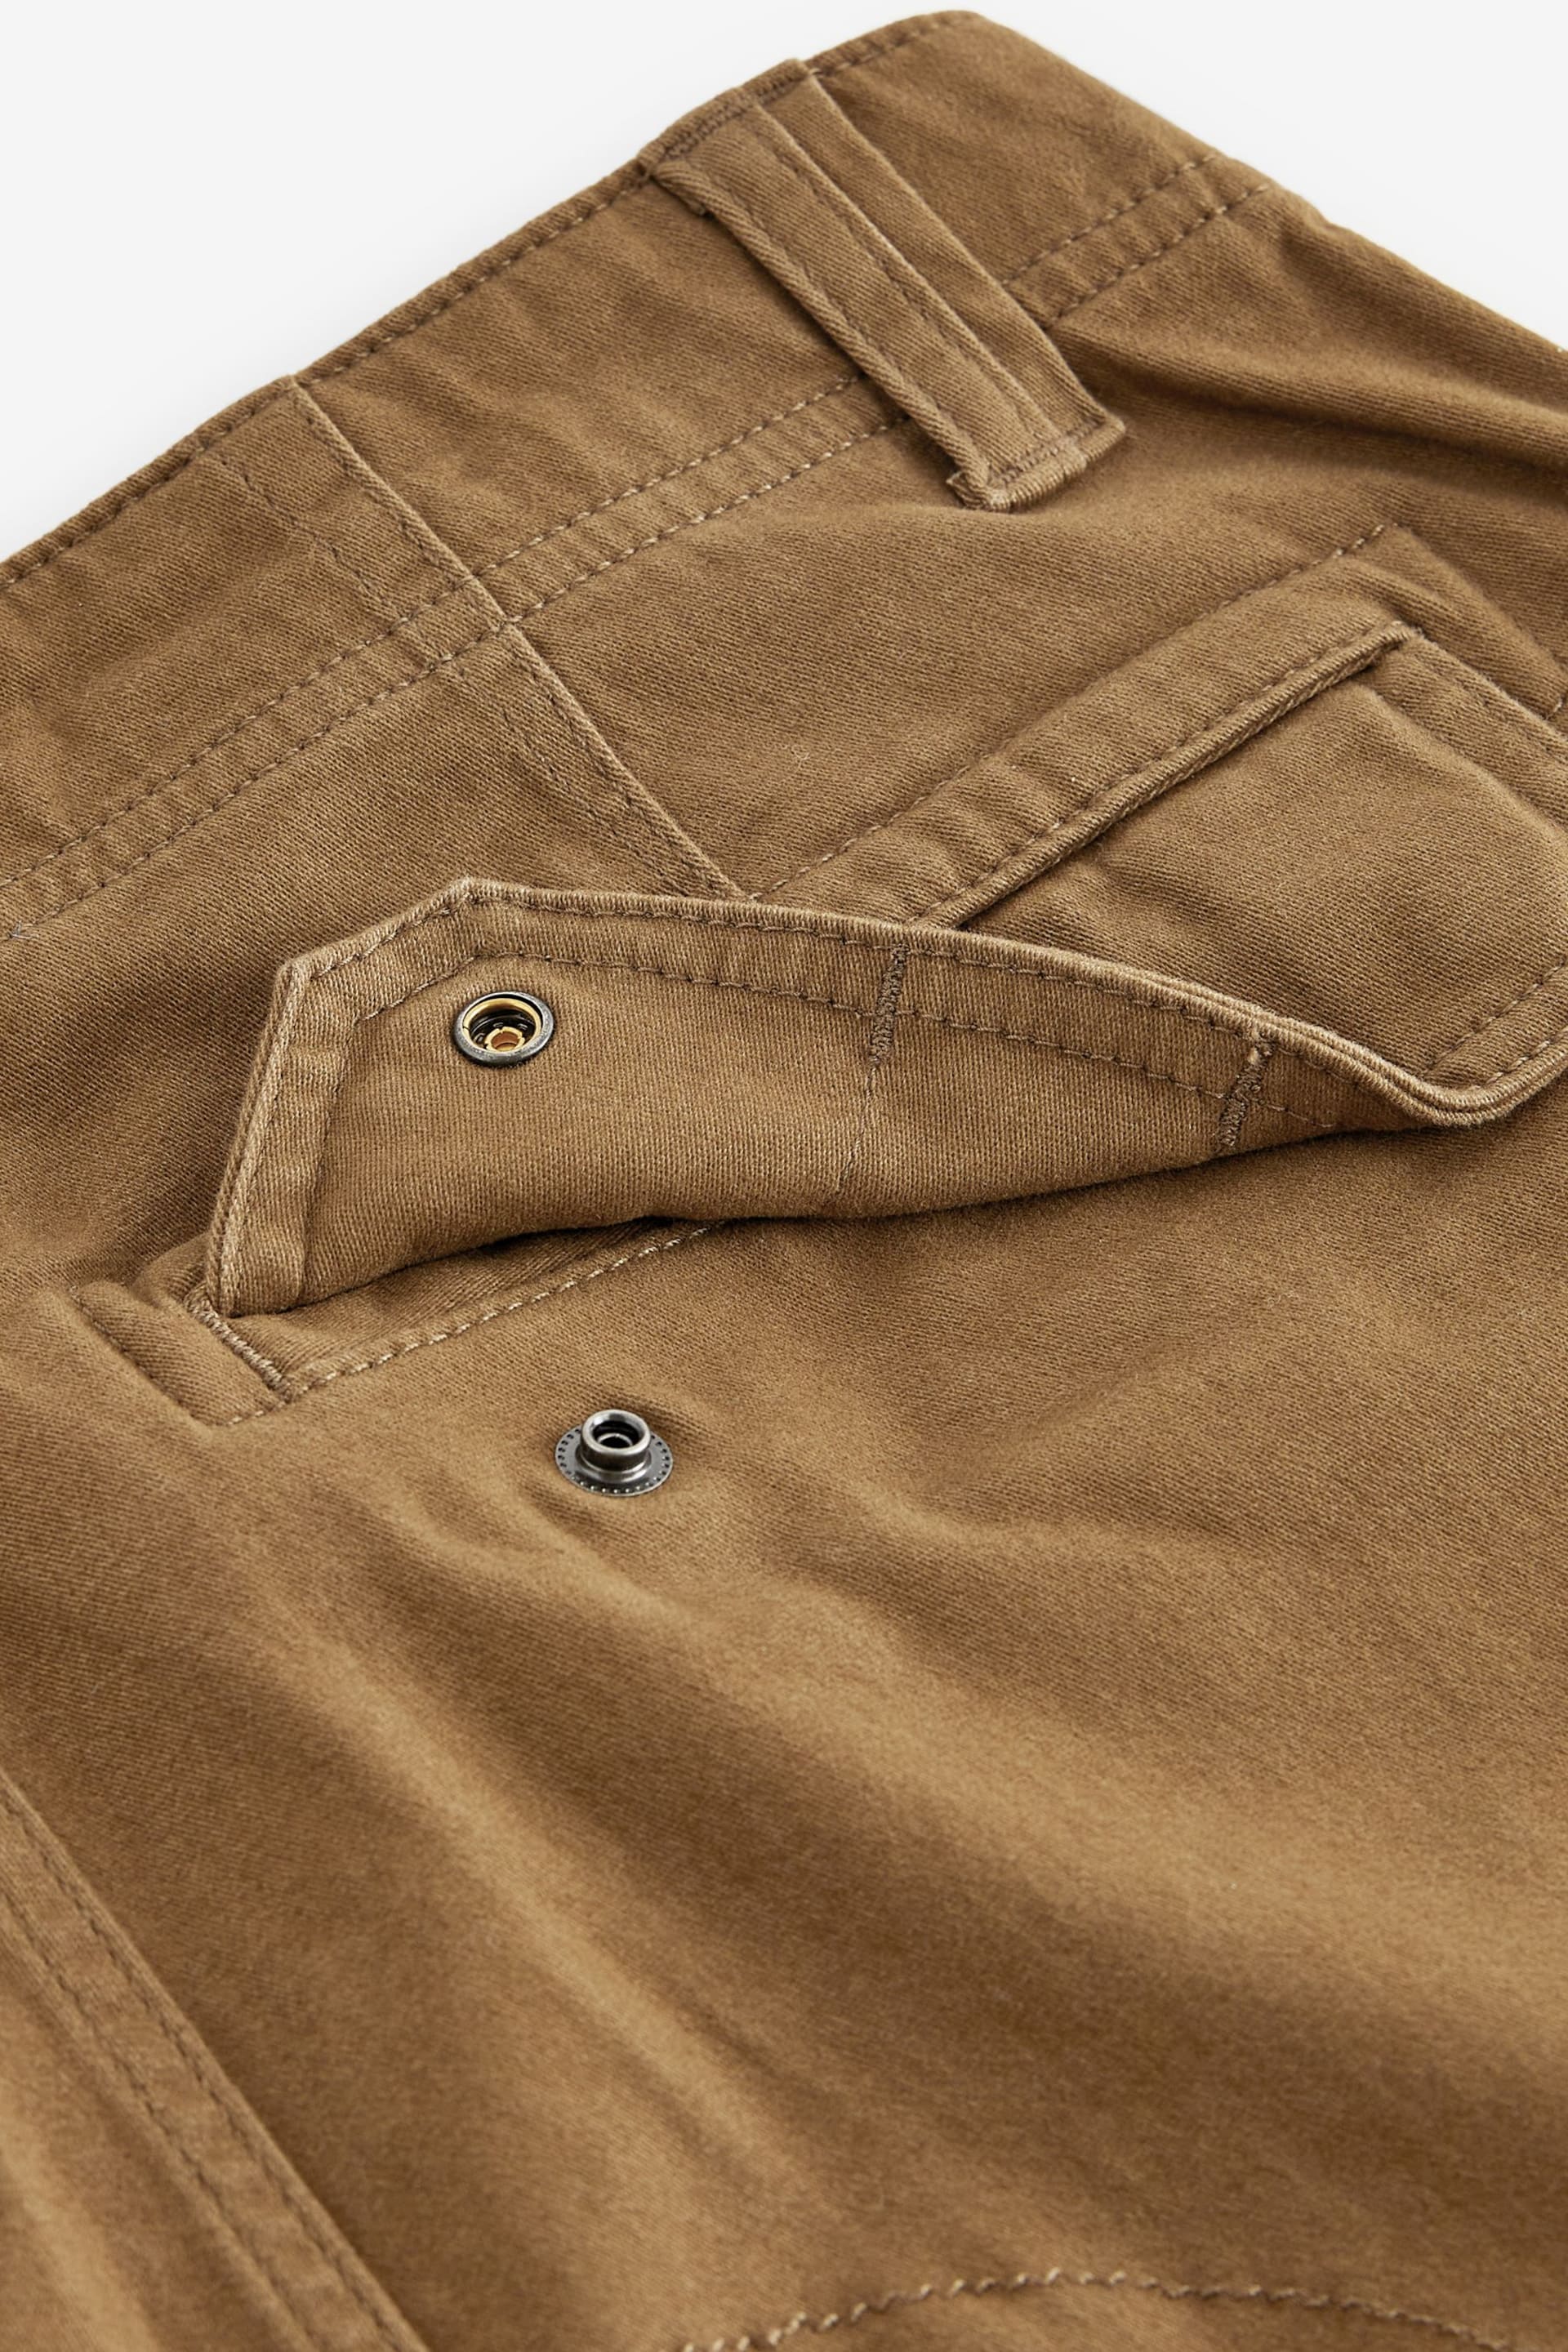 Tan Brown Slim Fit Cotton Stretch Cargo Trousers - Image 10 of 11